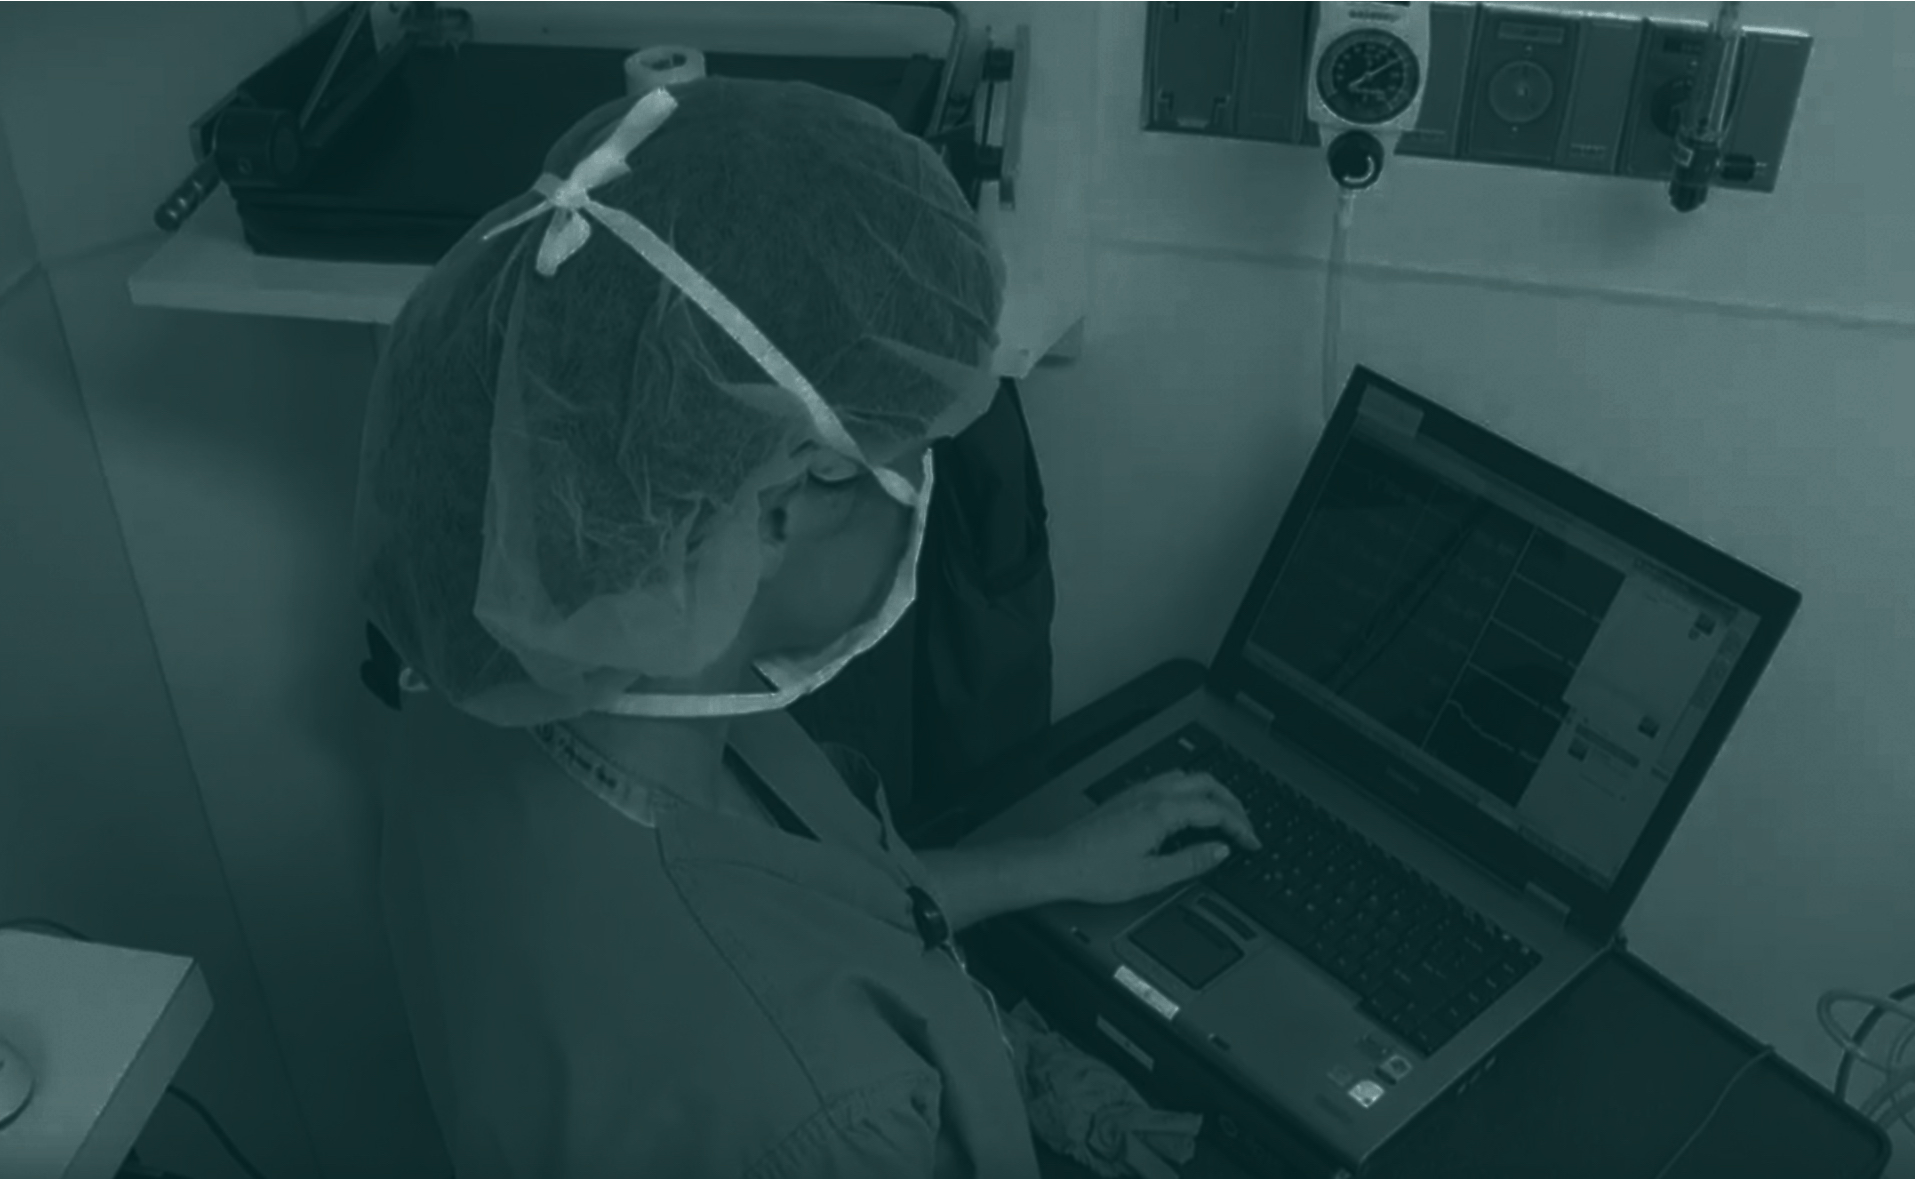 Intraoperative Neuromonitoring and IONM Services from SpecialtyCare